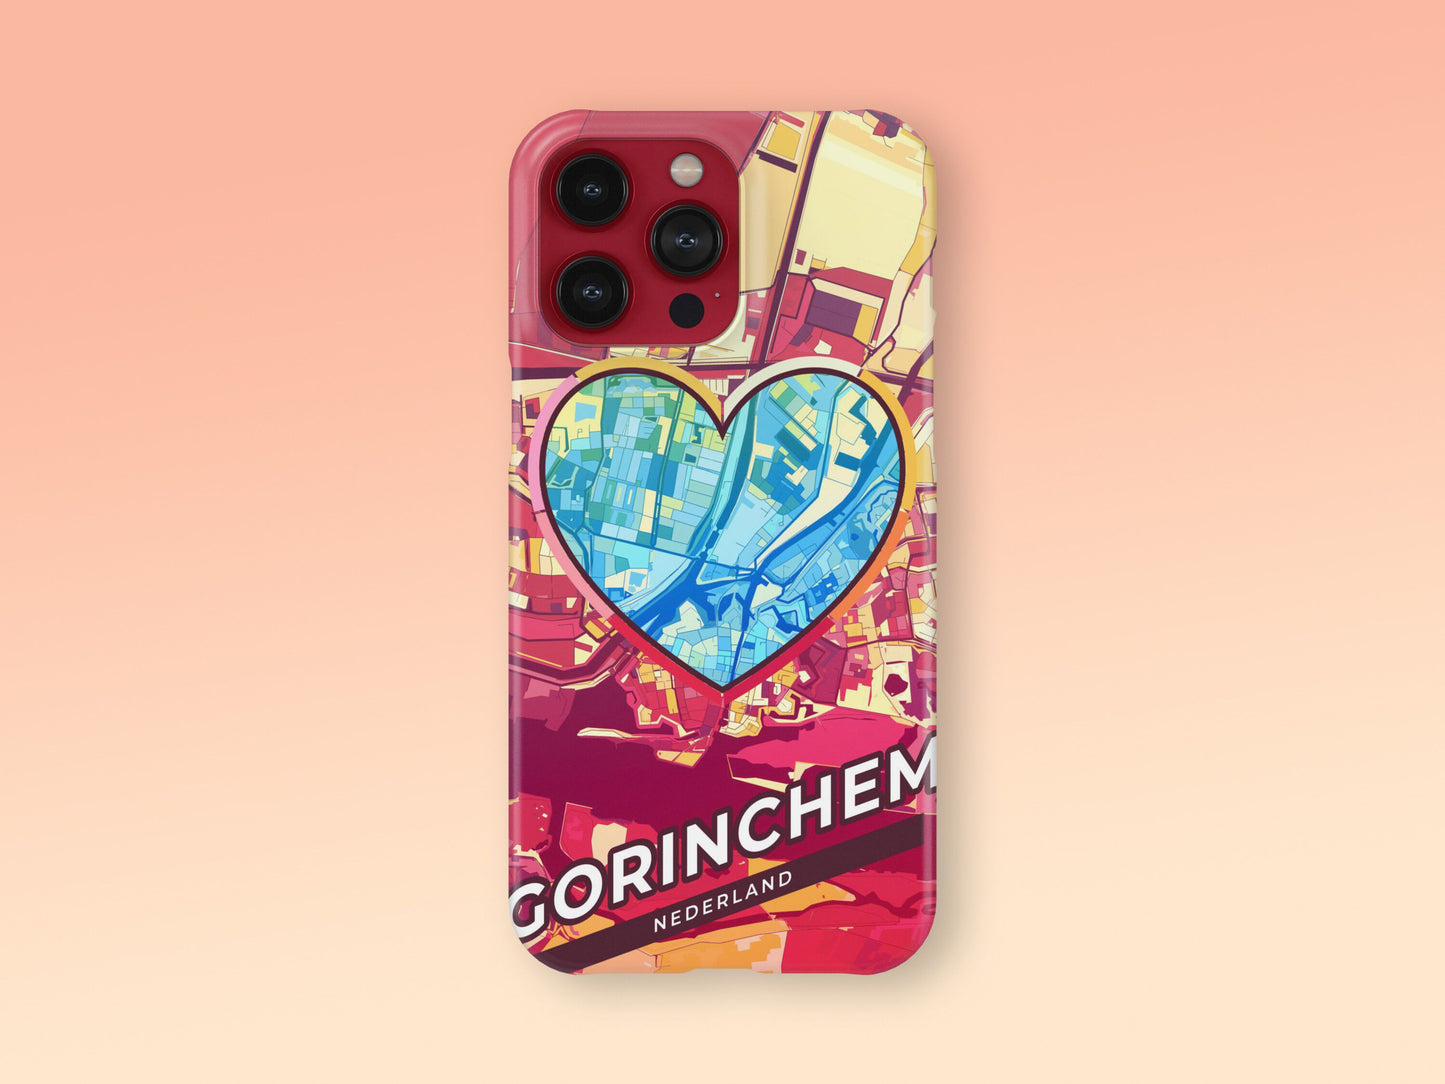 Gorinchem Netherlands slim phone case with colorful icon. Birthday, wedding or housewarming gift. Couple match cases. 2